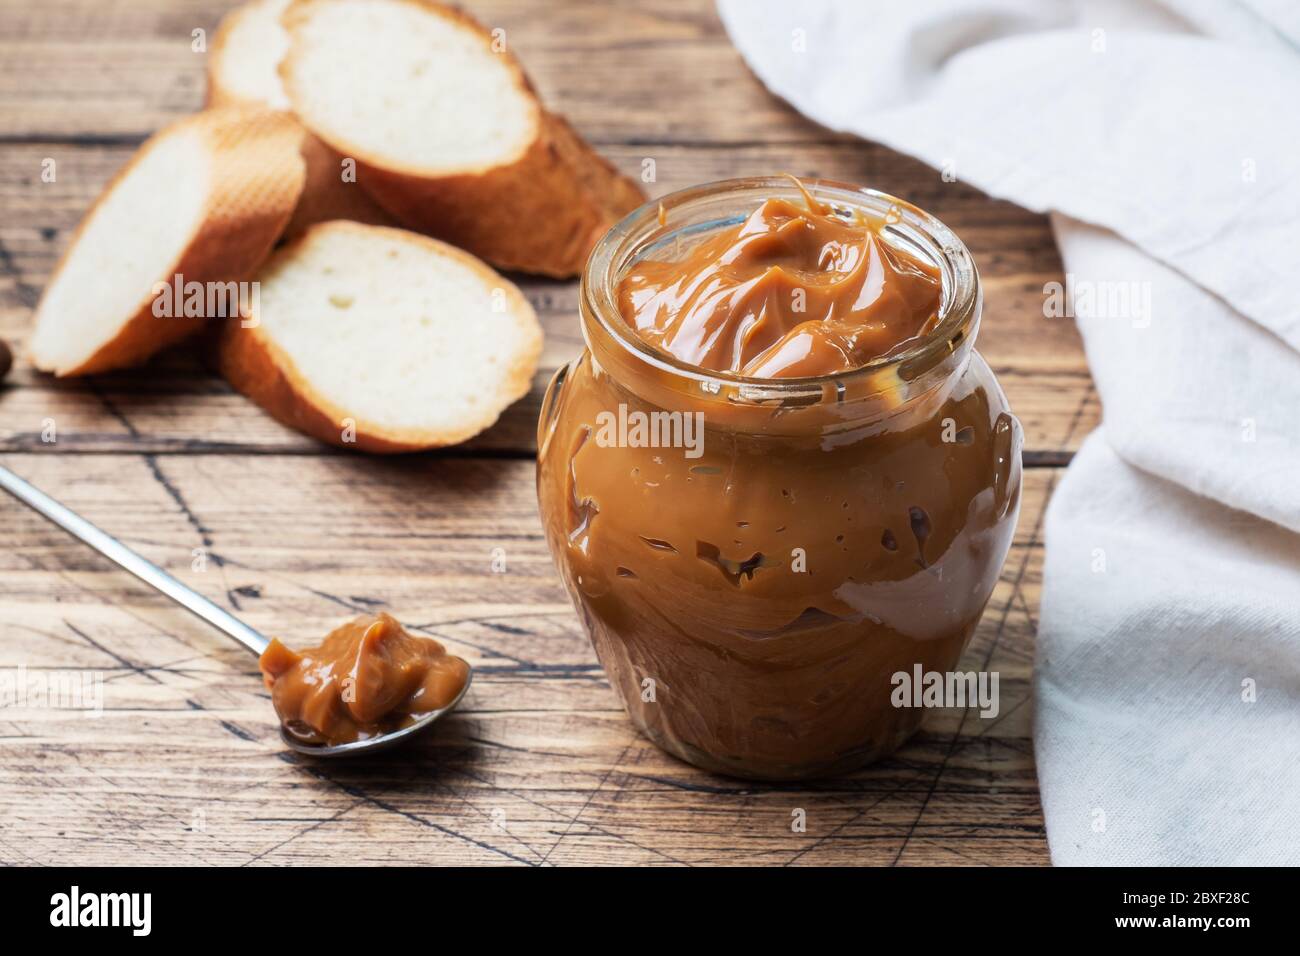 Boiled condensed milk with a glass jar on a wooden background. Sweet paste spread on slices of bread for Breakfast and dessert Stock Photo